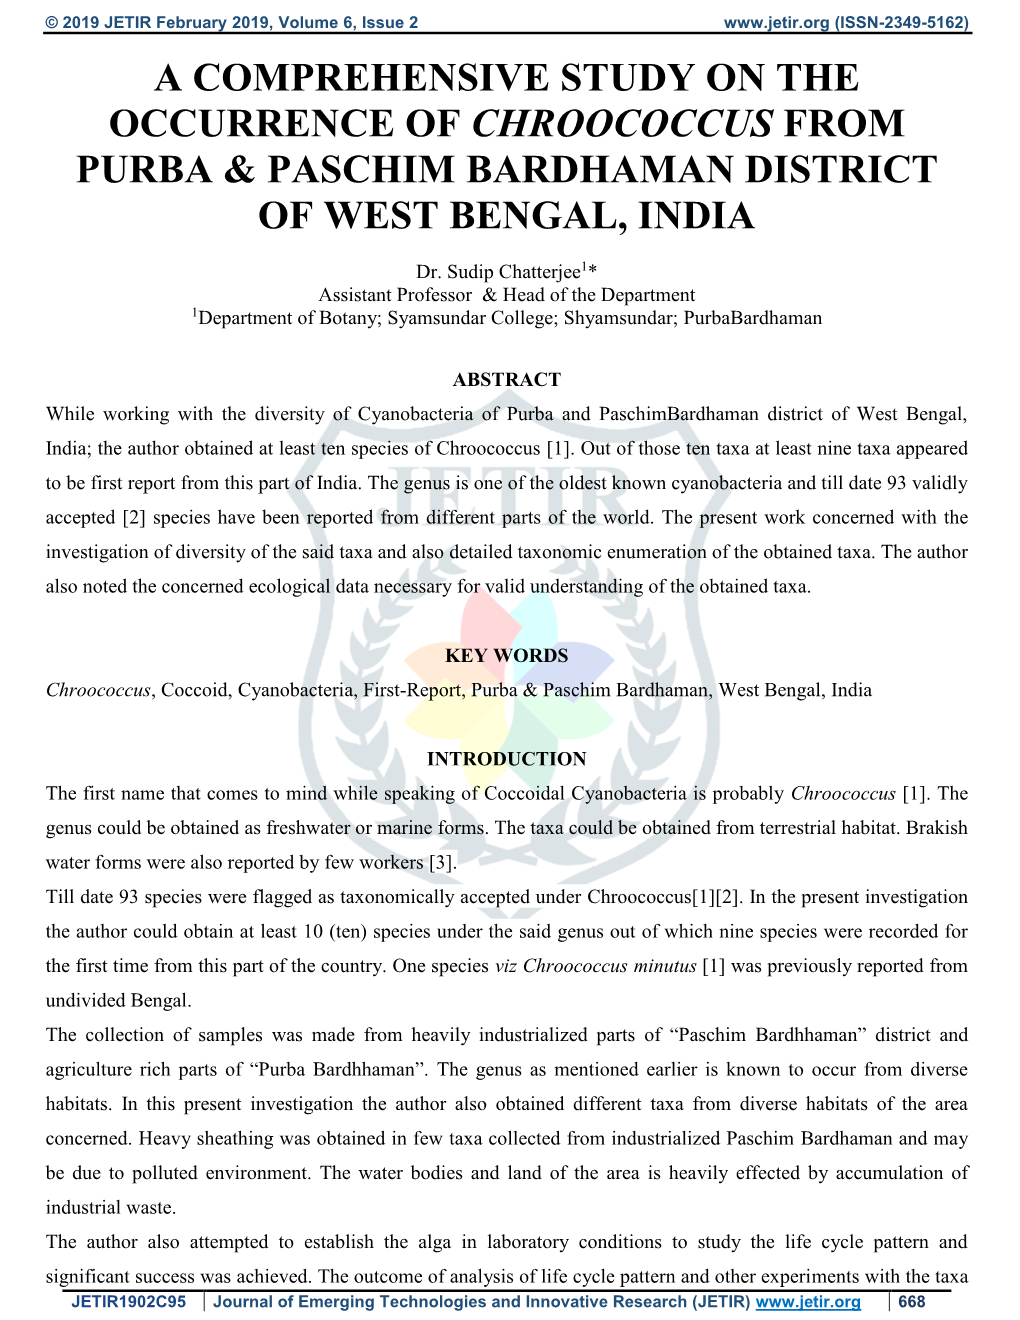 A Comprehensive Study on the Occurrence of Chroococcus from Purba & Paschim Bardhaman District of West Bengal, India